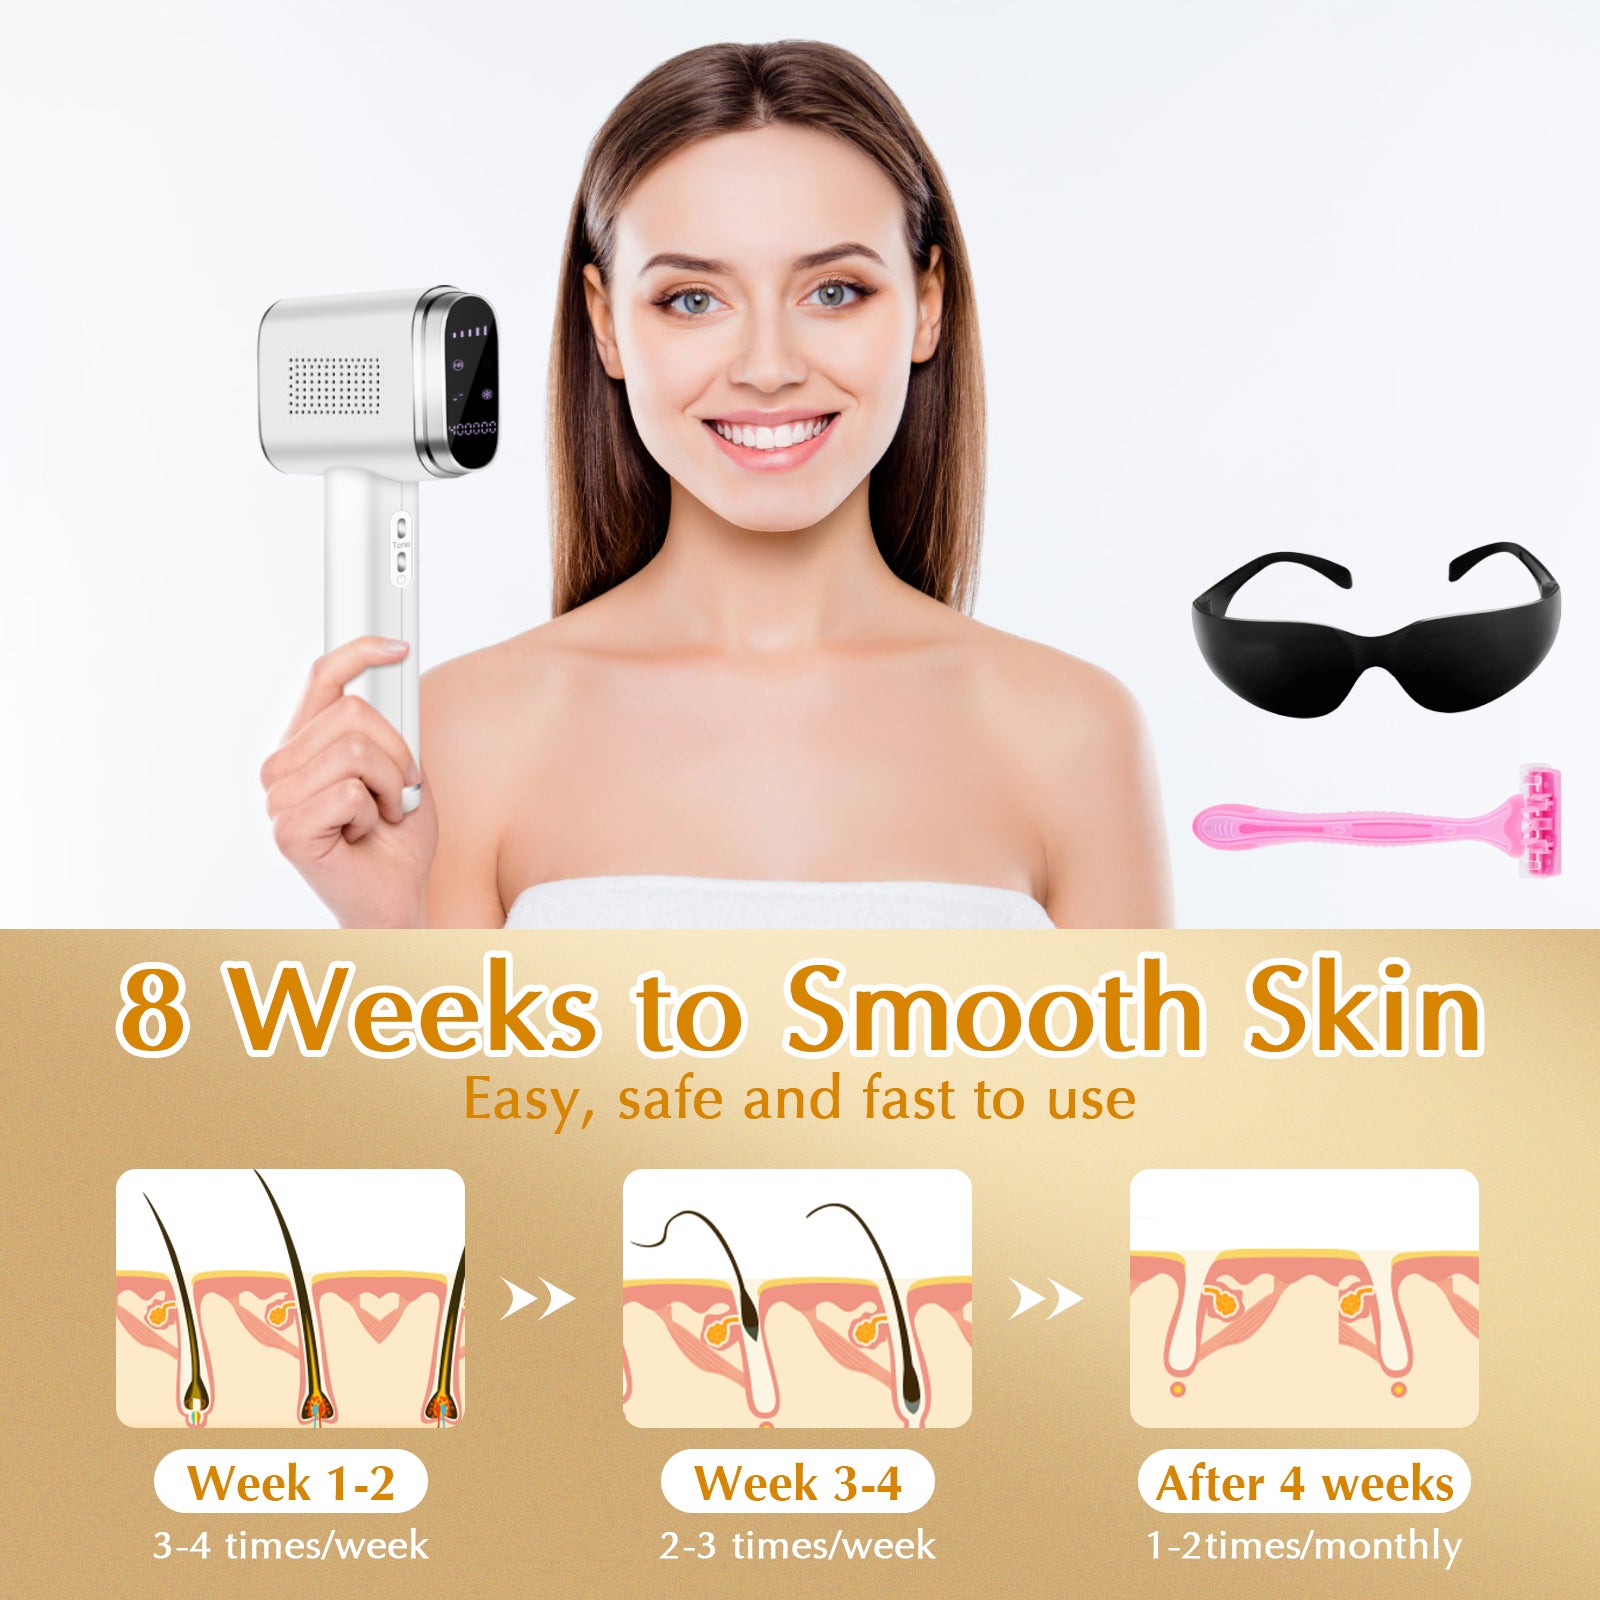 Hotodeal Laser Hair Removal - Painless IPL Hair Removal with Sapphire Ice-Cooling Technology